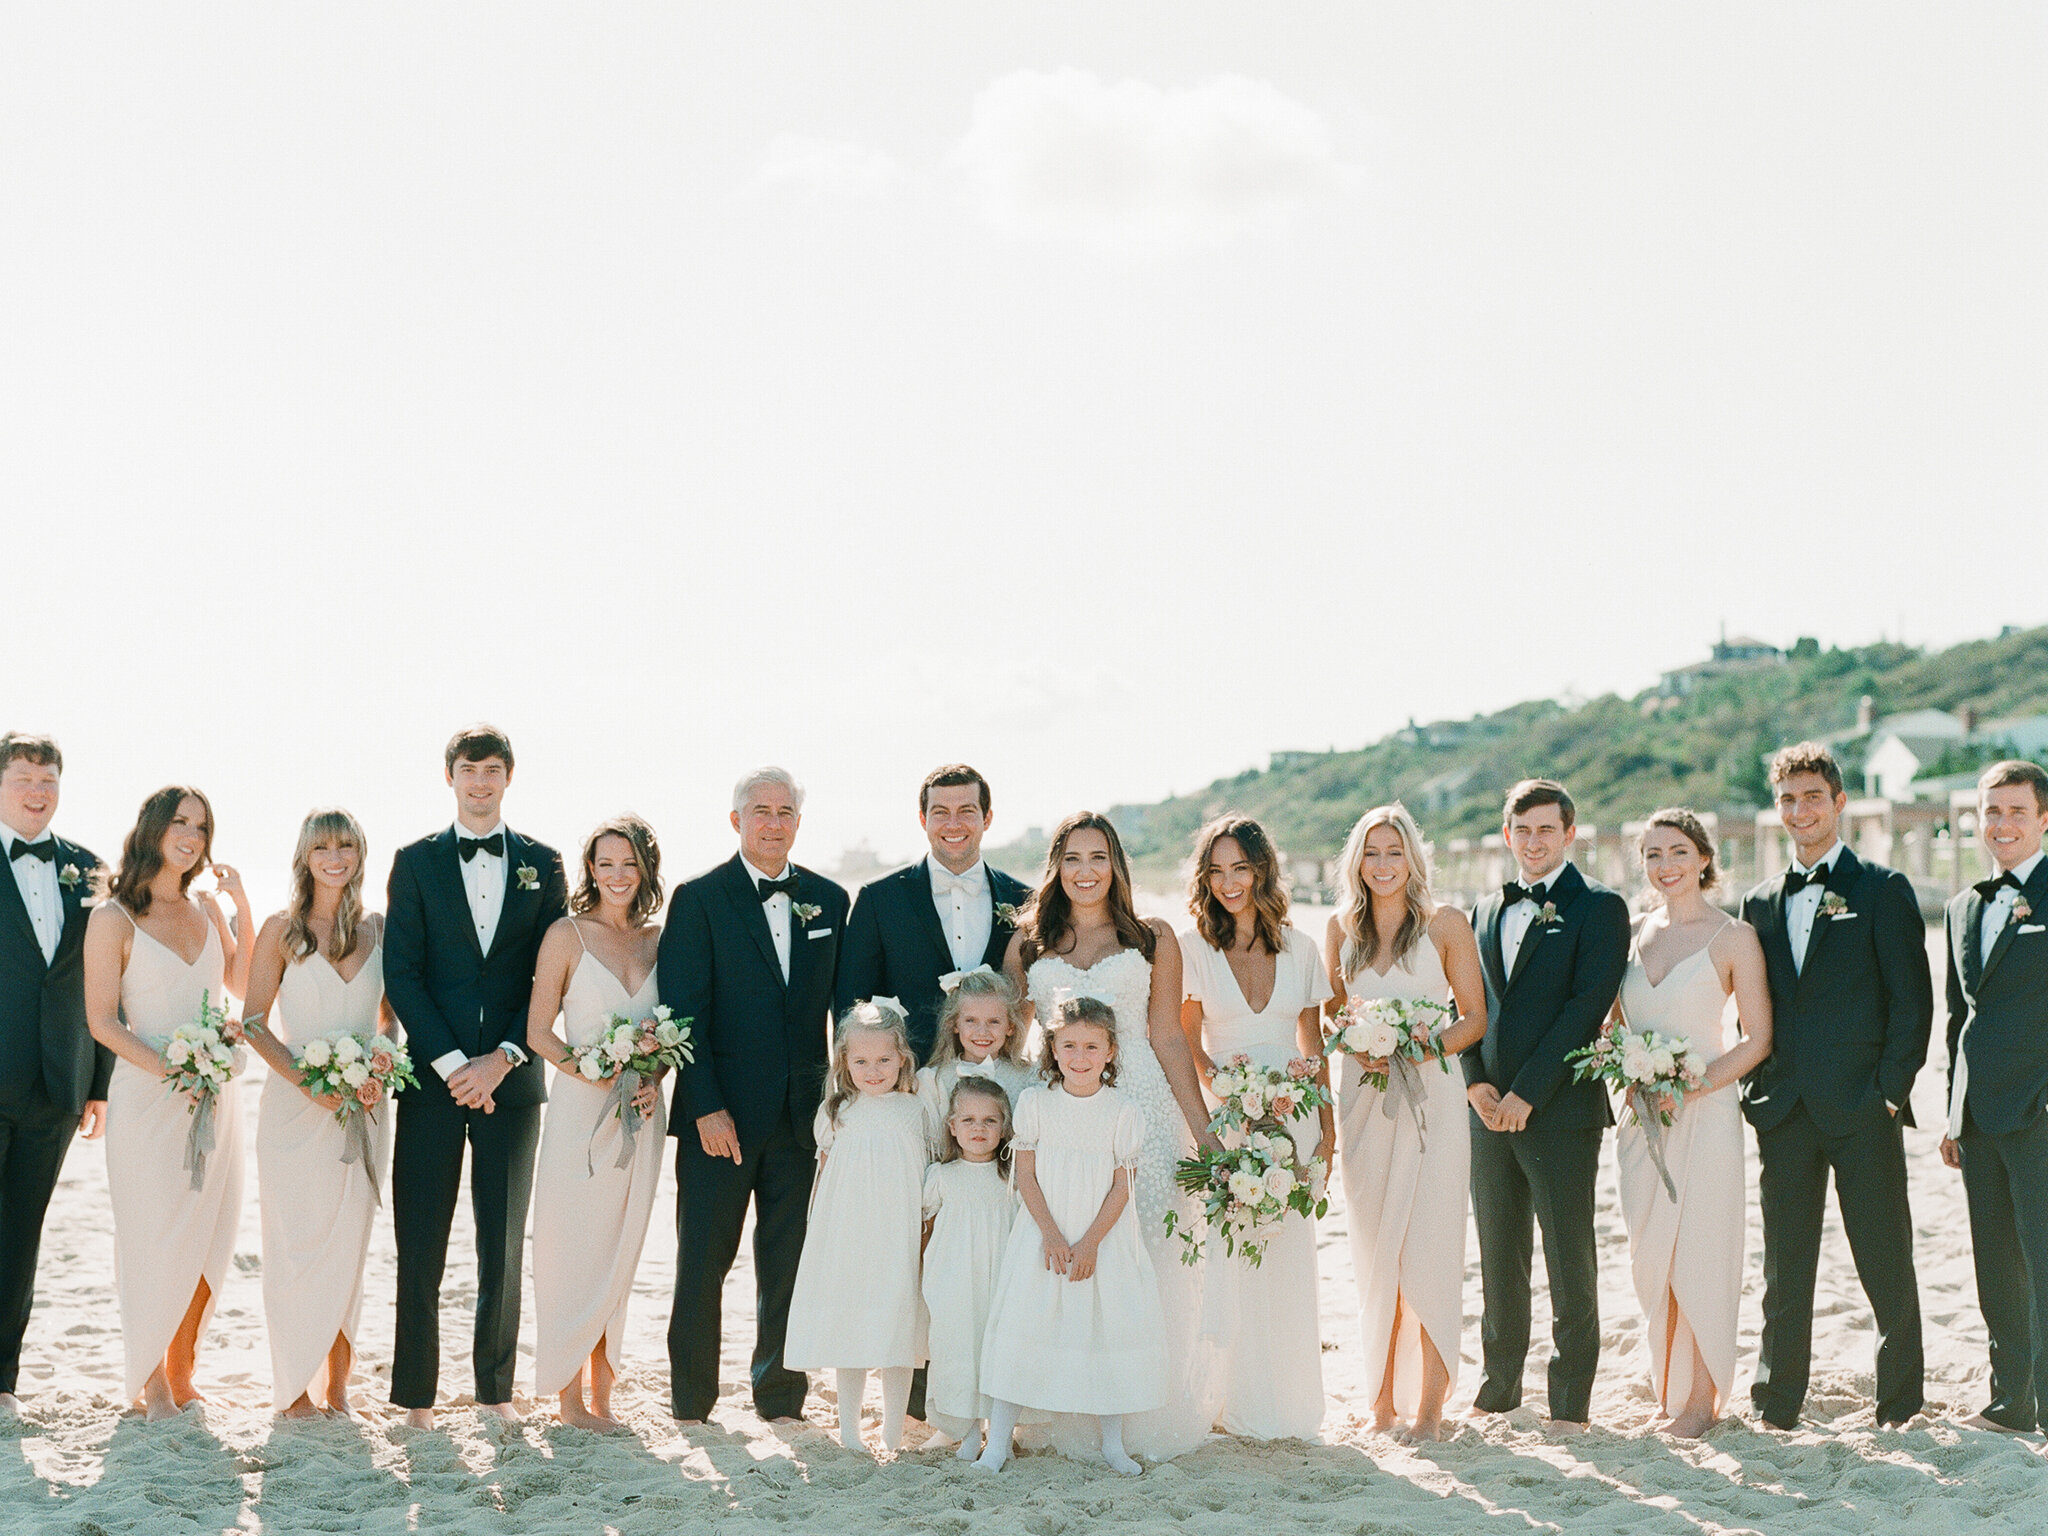 Bridal Party Photos on the Beach in Montauk